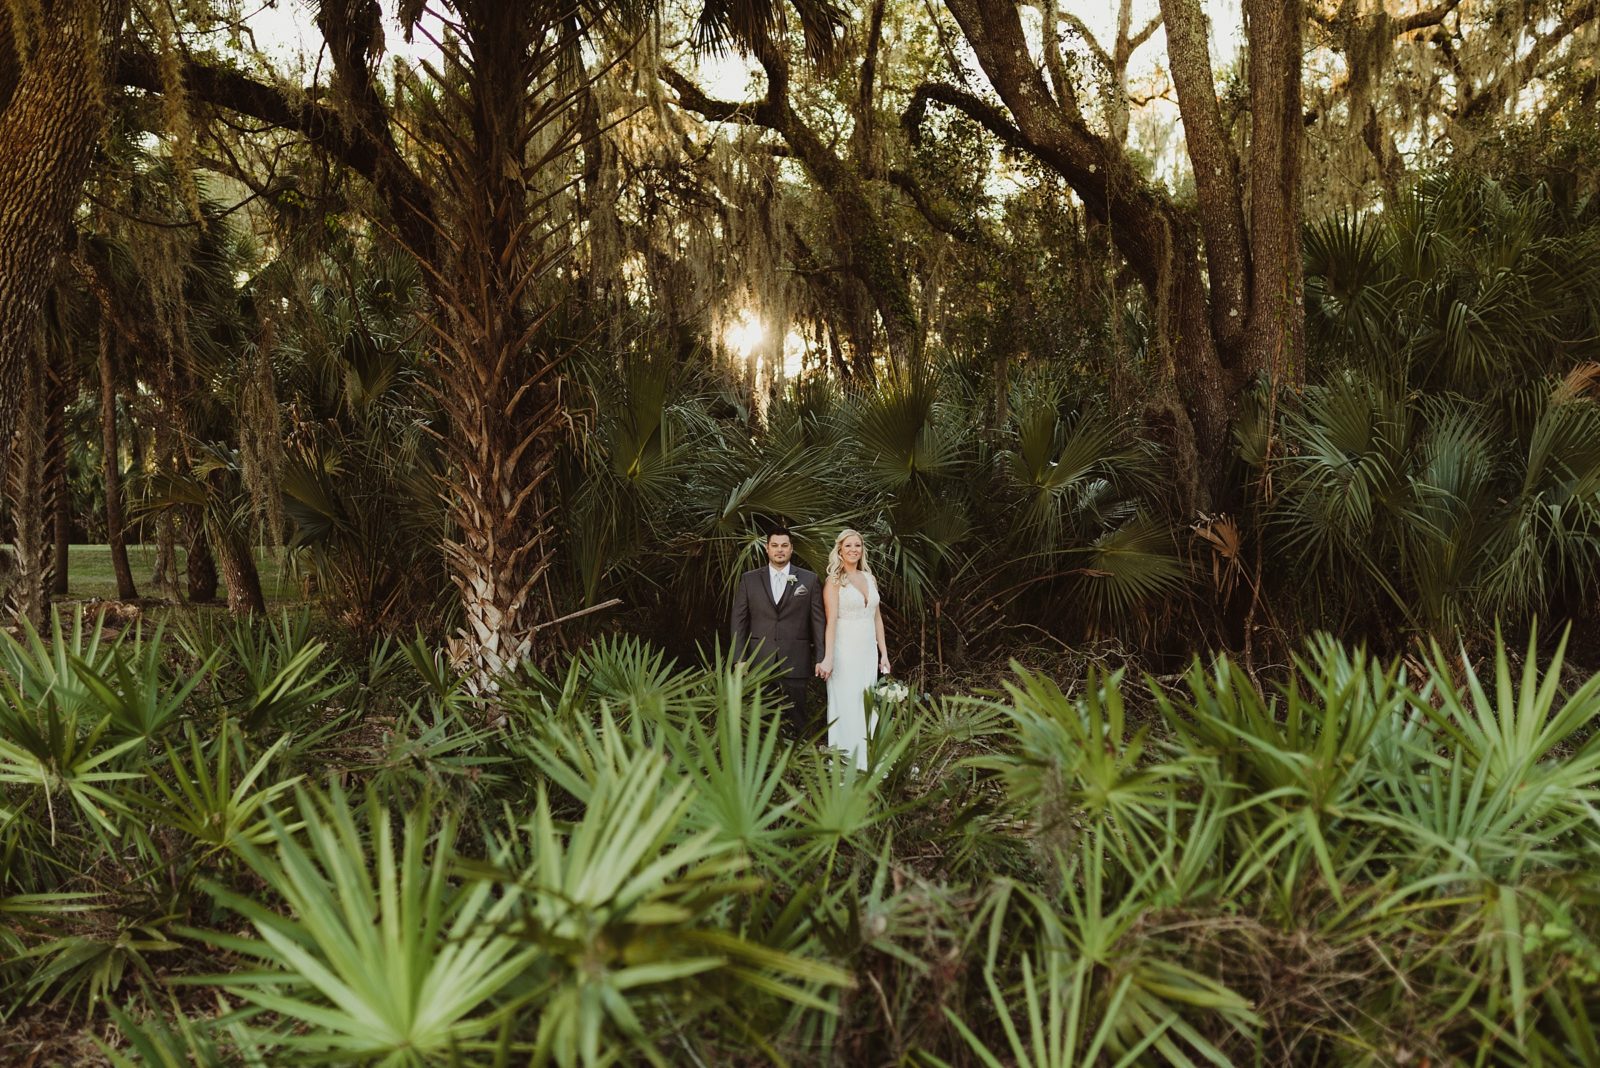 badass bride and groom portrait surrounded by palms at Tampa Palms Country Club in Tampa, Florida.